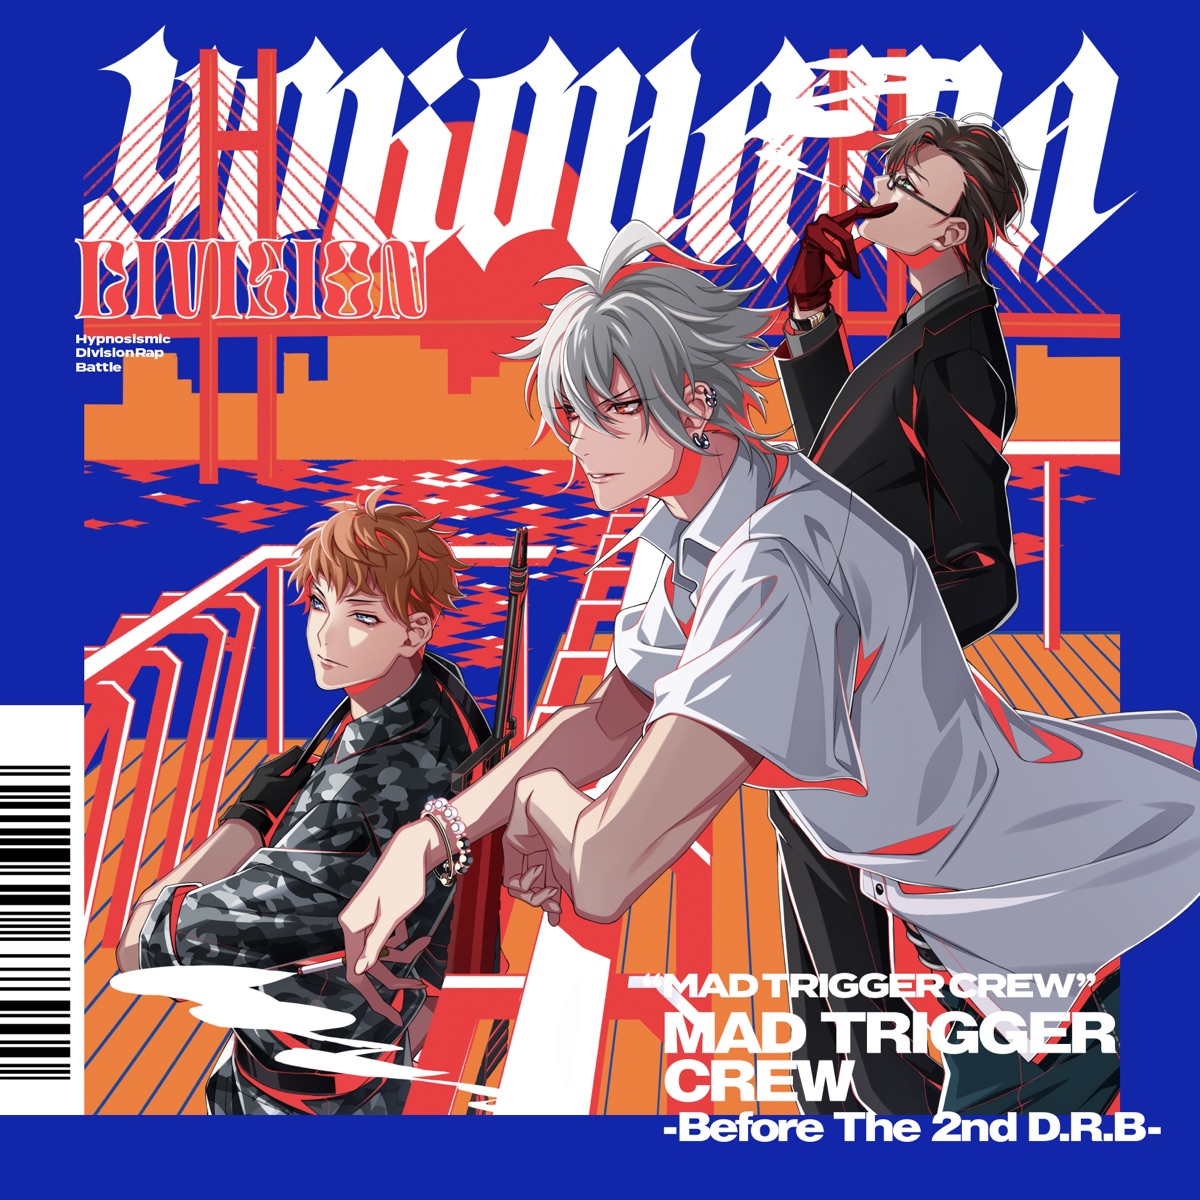 Cover art for『Samatoki Aohitsugi (Shintaro Asanuma) - Gangsta's Paradise』from the release『MAD TRIGGER CREW-Before The 2nd D.R.B-